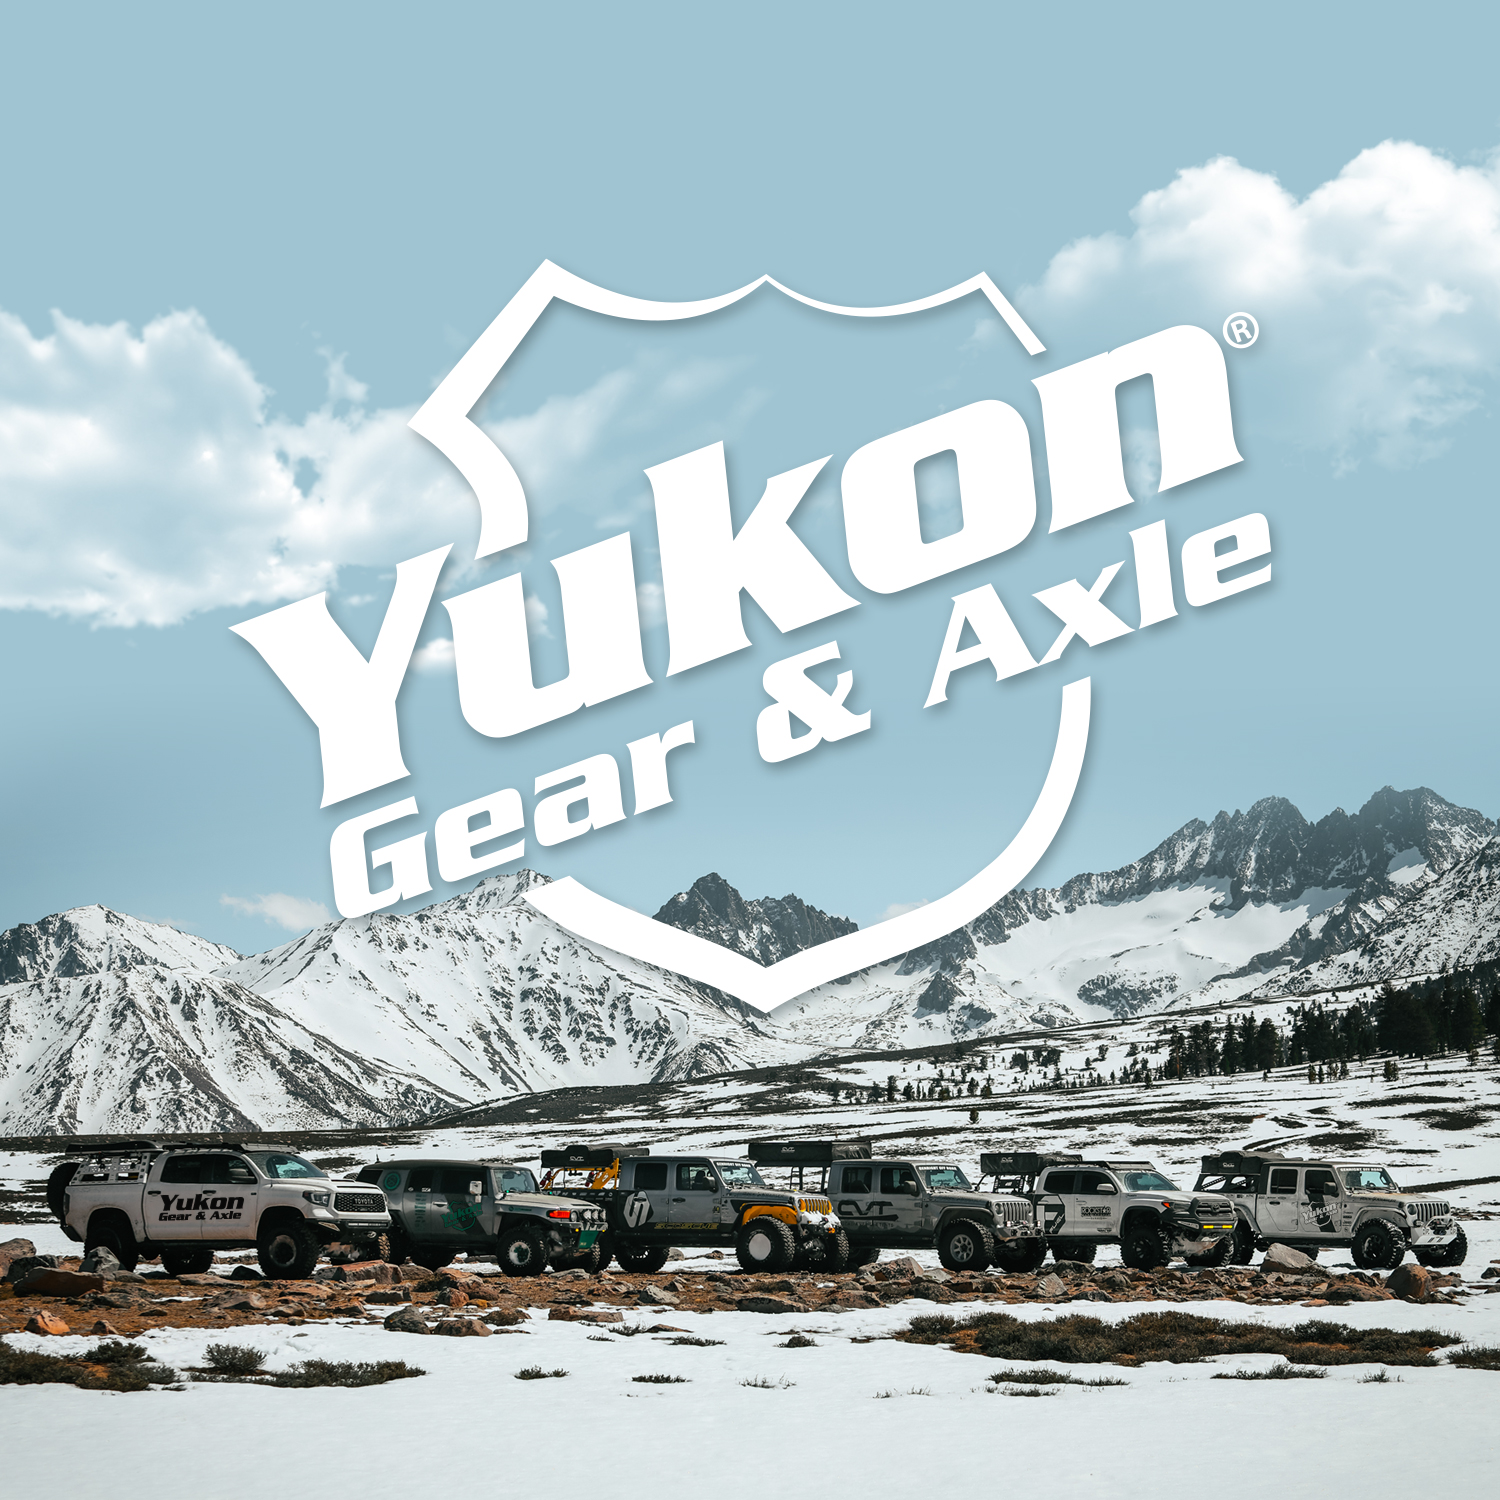 Yukon Minor install kit for GM Chevy 55P and 55T differential 